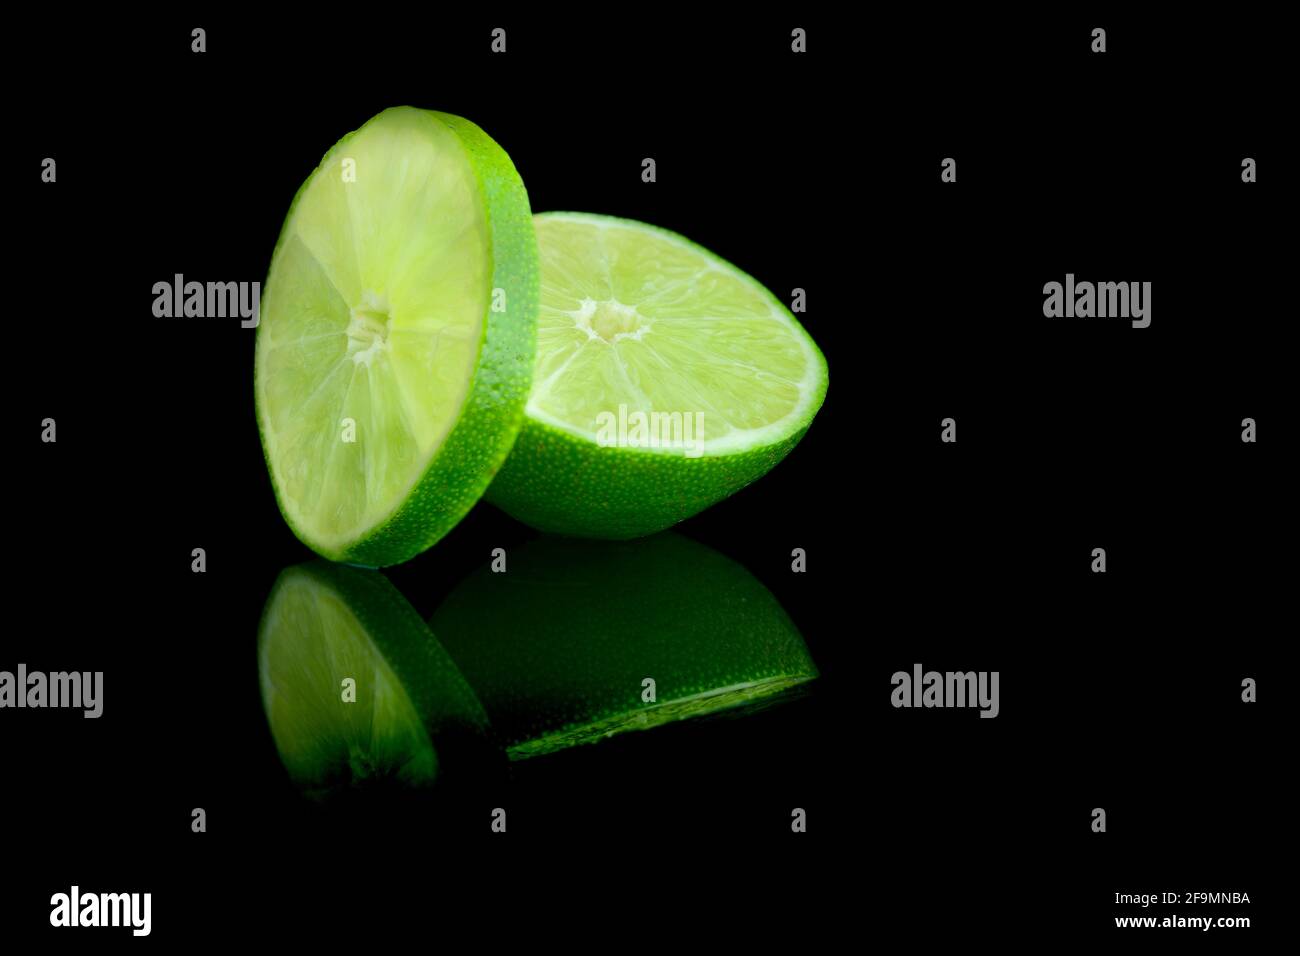 Image of lime with reflection on dark background Stock Photo